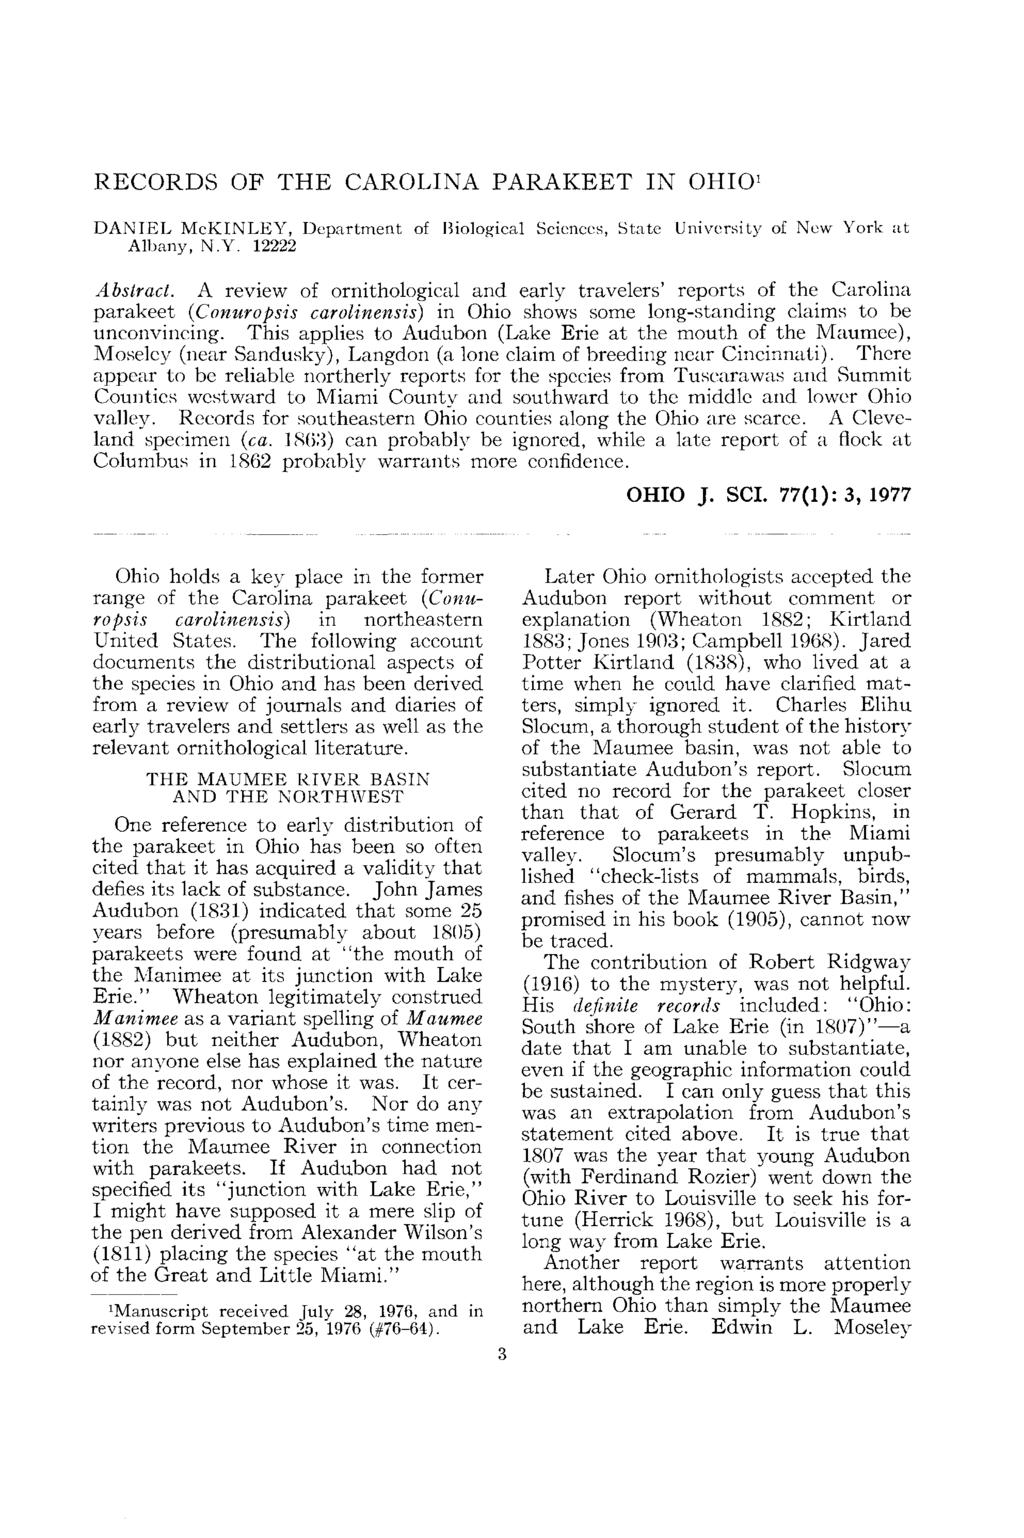 RECORDS OF THE CAROLINA PARAKEET IN OHIO 1 DANIEL McKINLEY, Department of Biological Sciences, State University of New York at Albany, N.Y. 12222 Abstract.